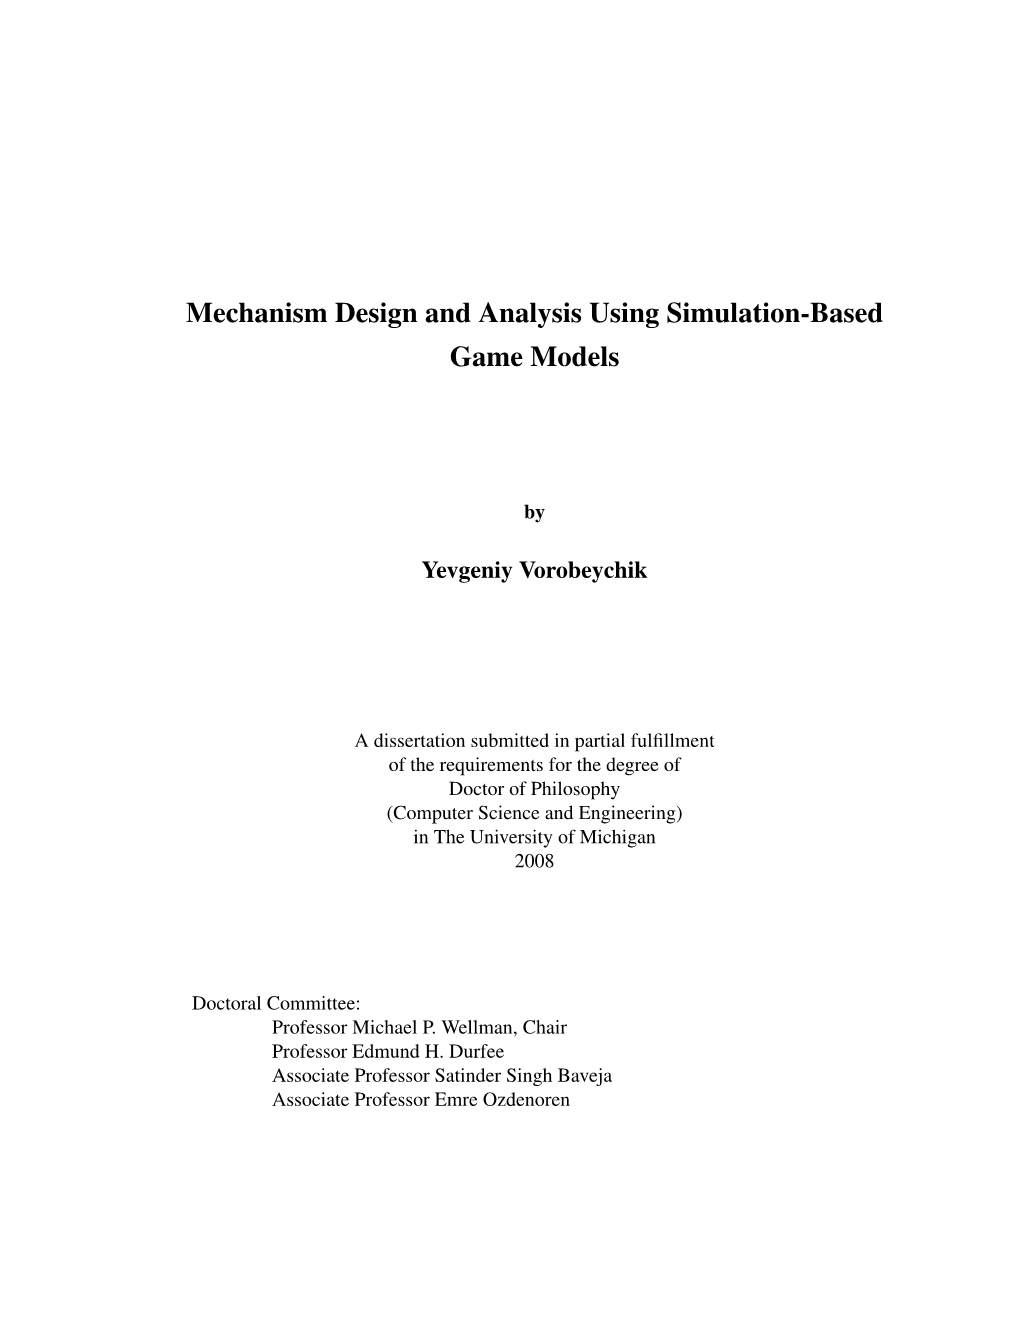 Mechanism Design and Analysis Using Simulation-Based Game Models